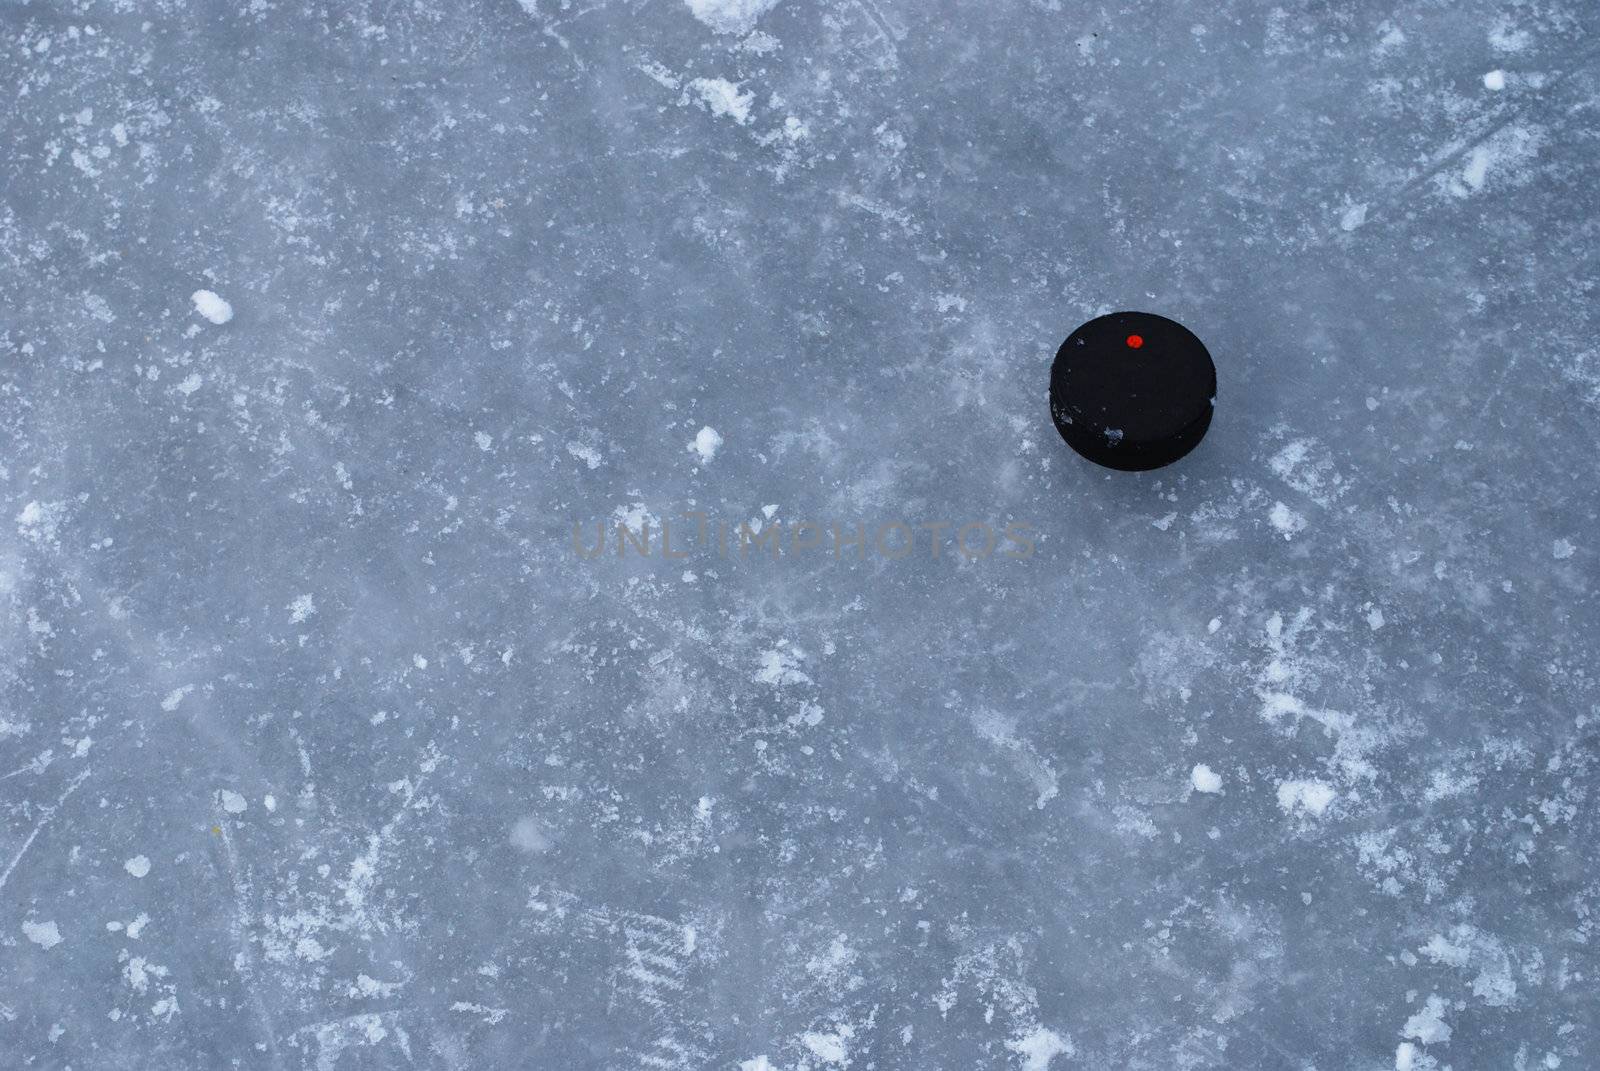 ice rink surface with a puck